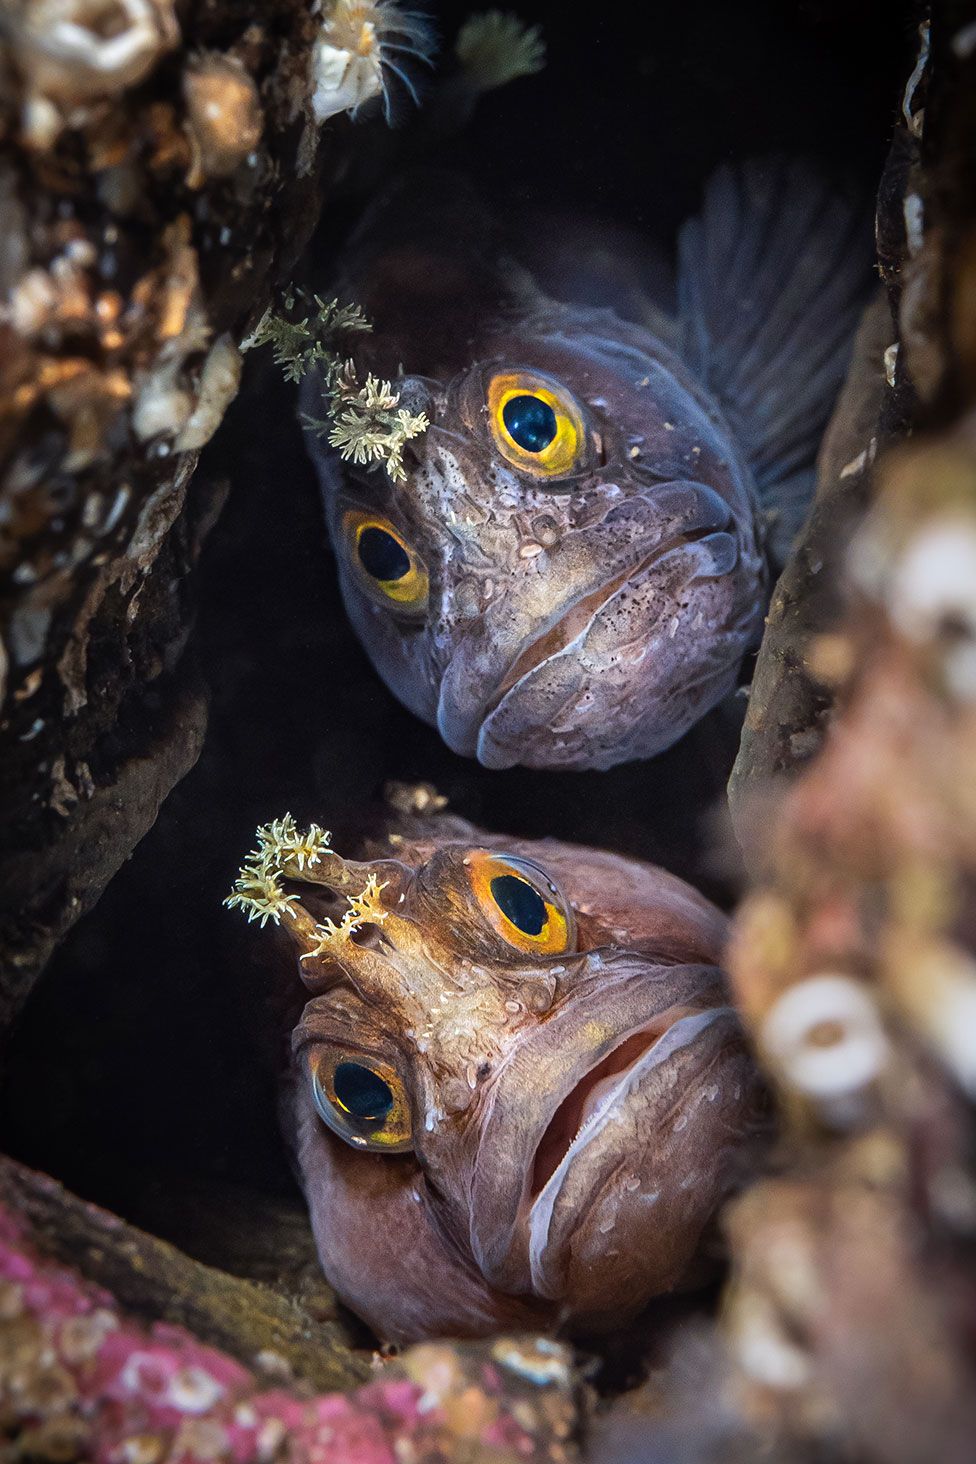 Two Yarrell blenny fish